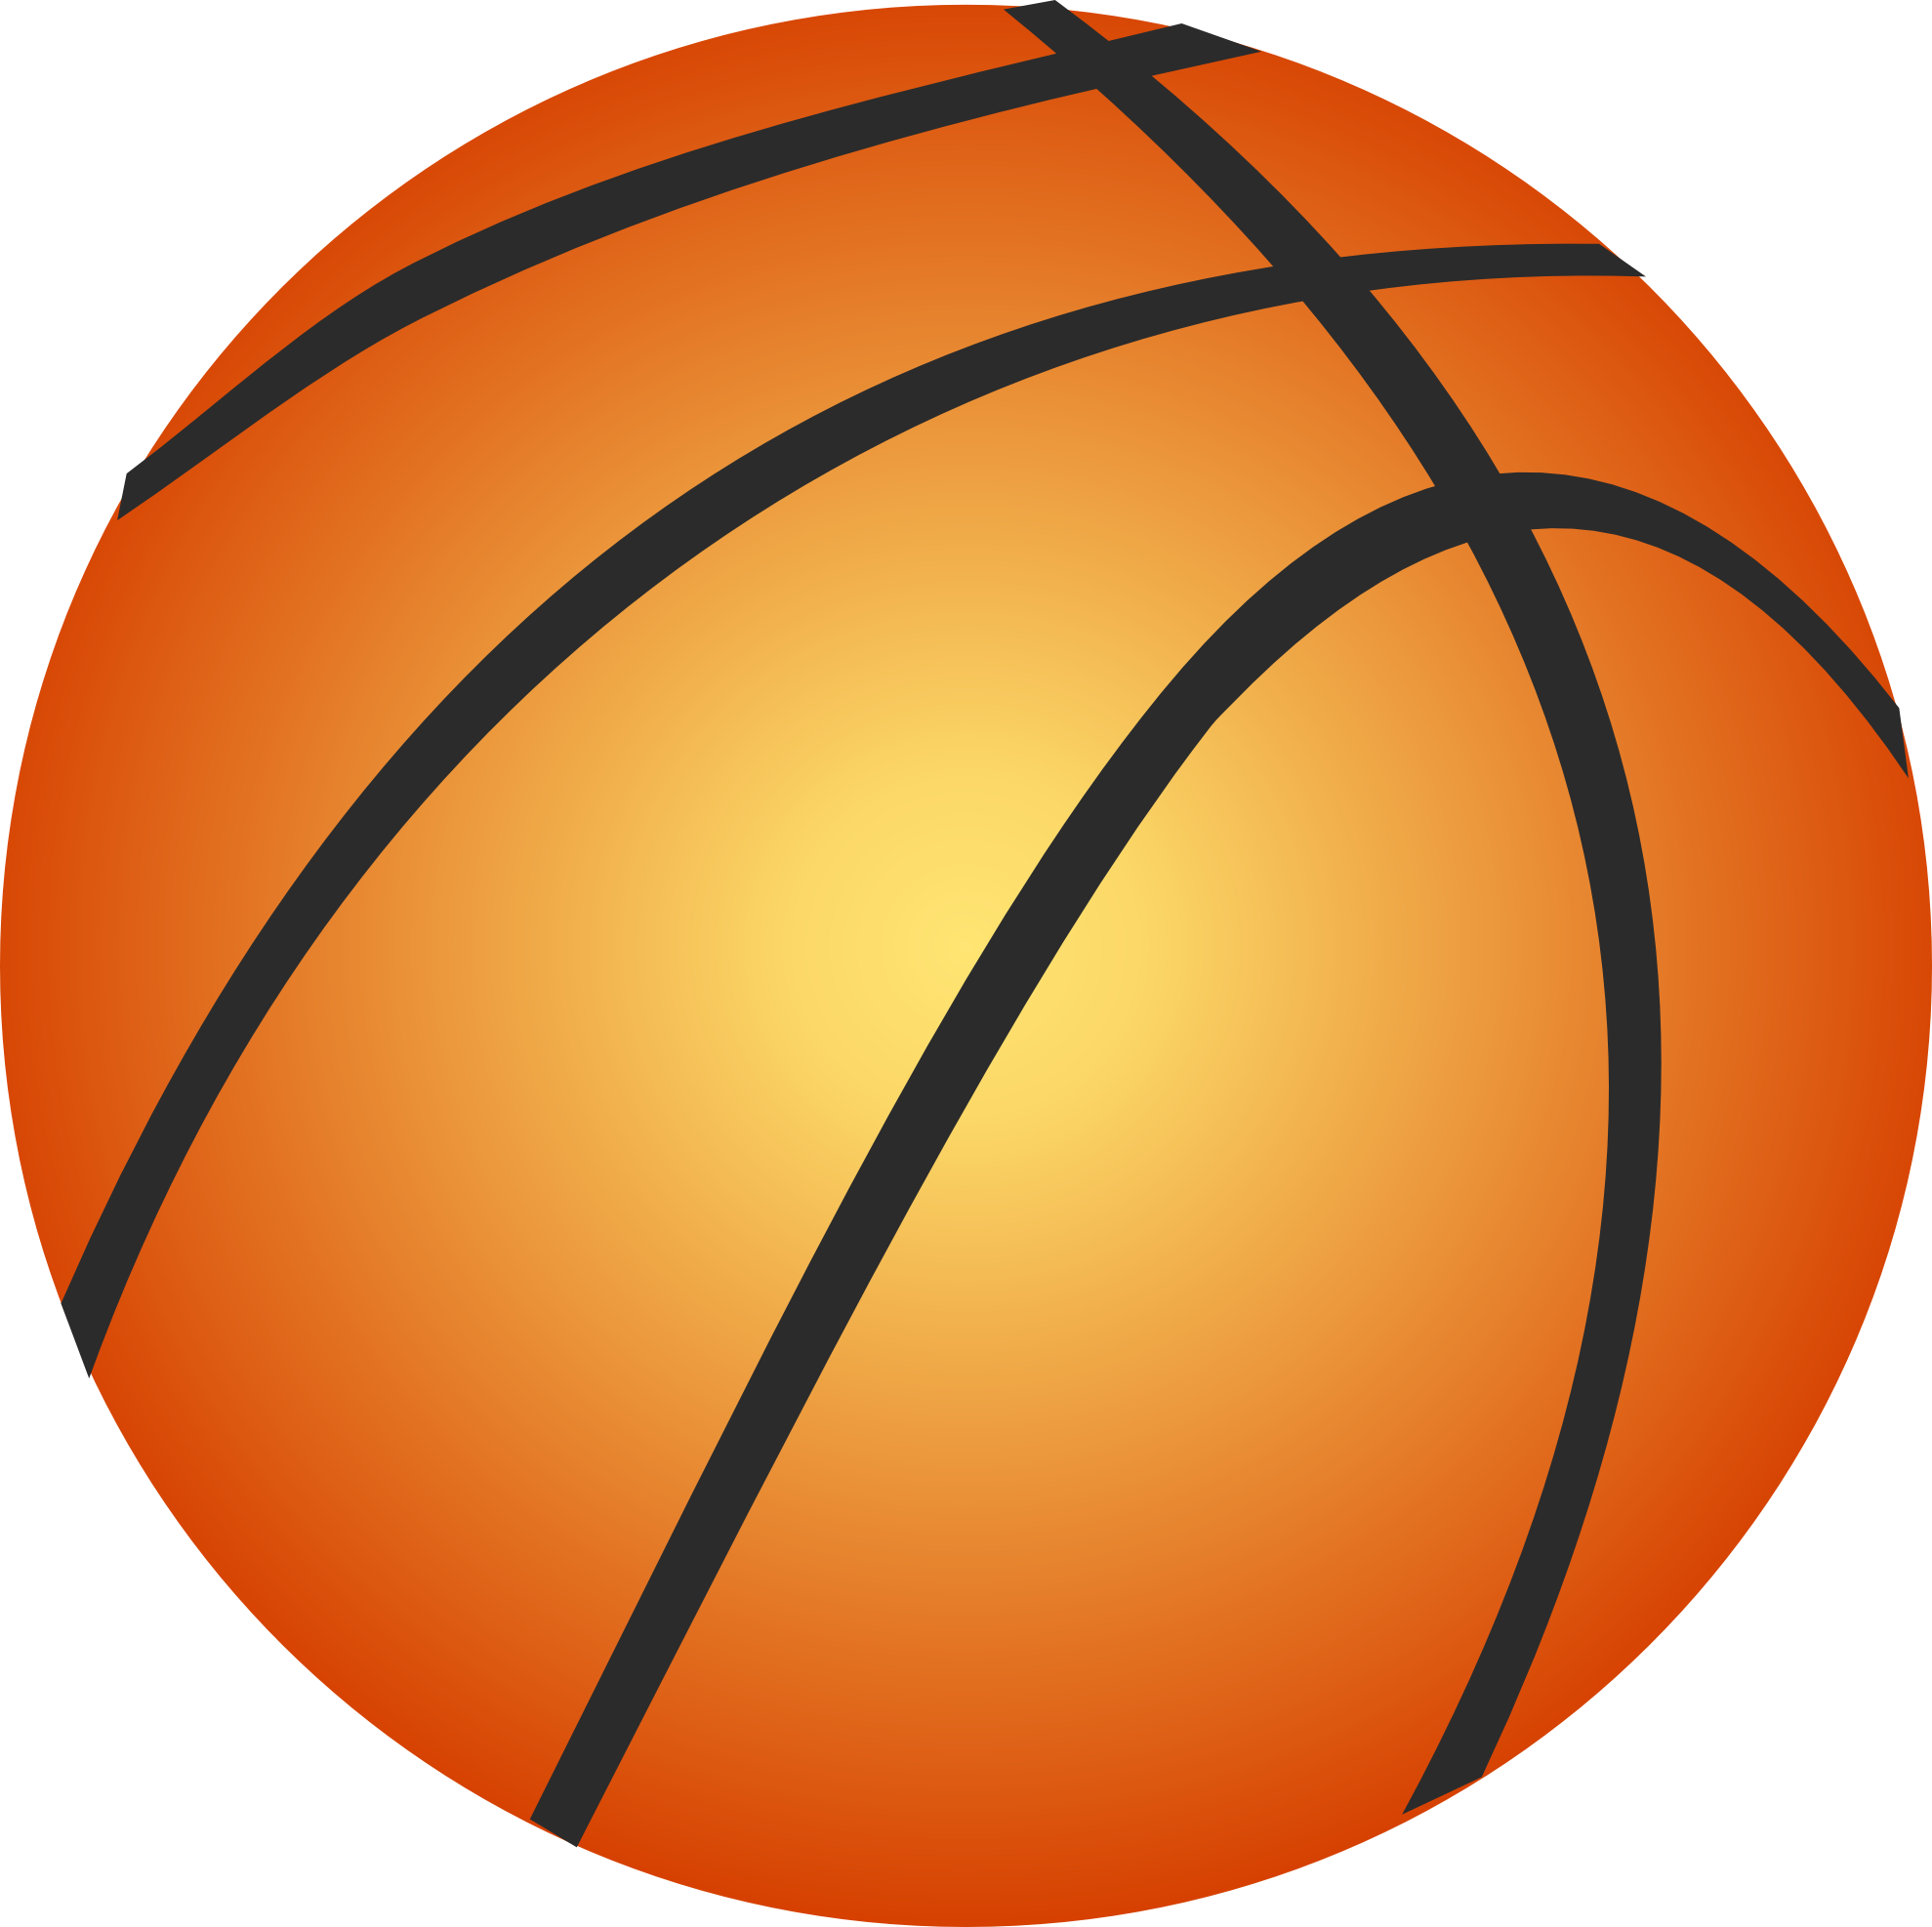 Basketball png images. Transparent pluspng ball image